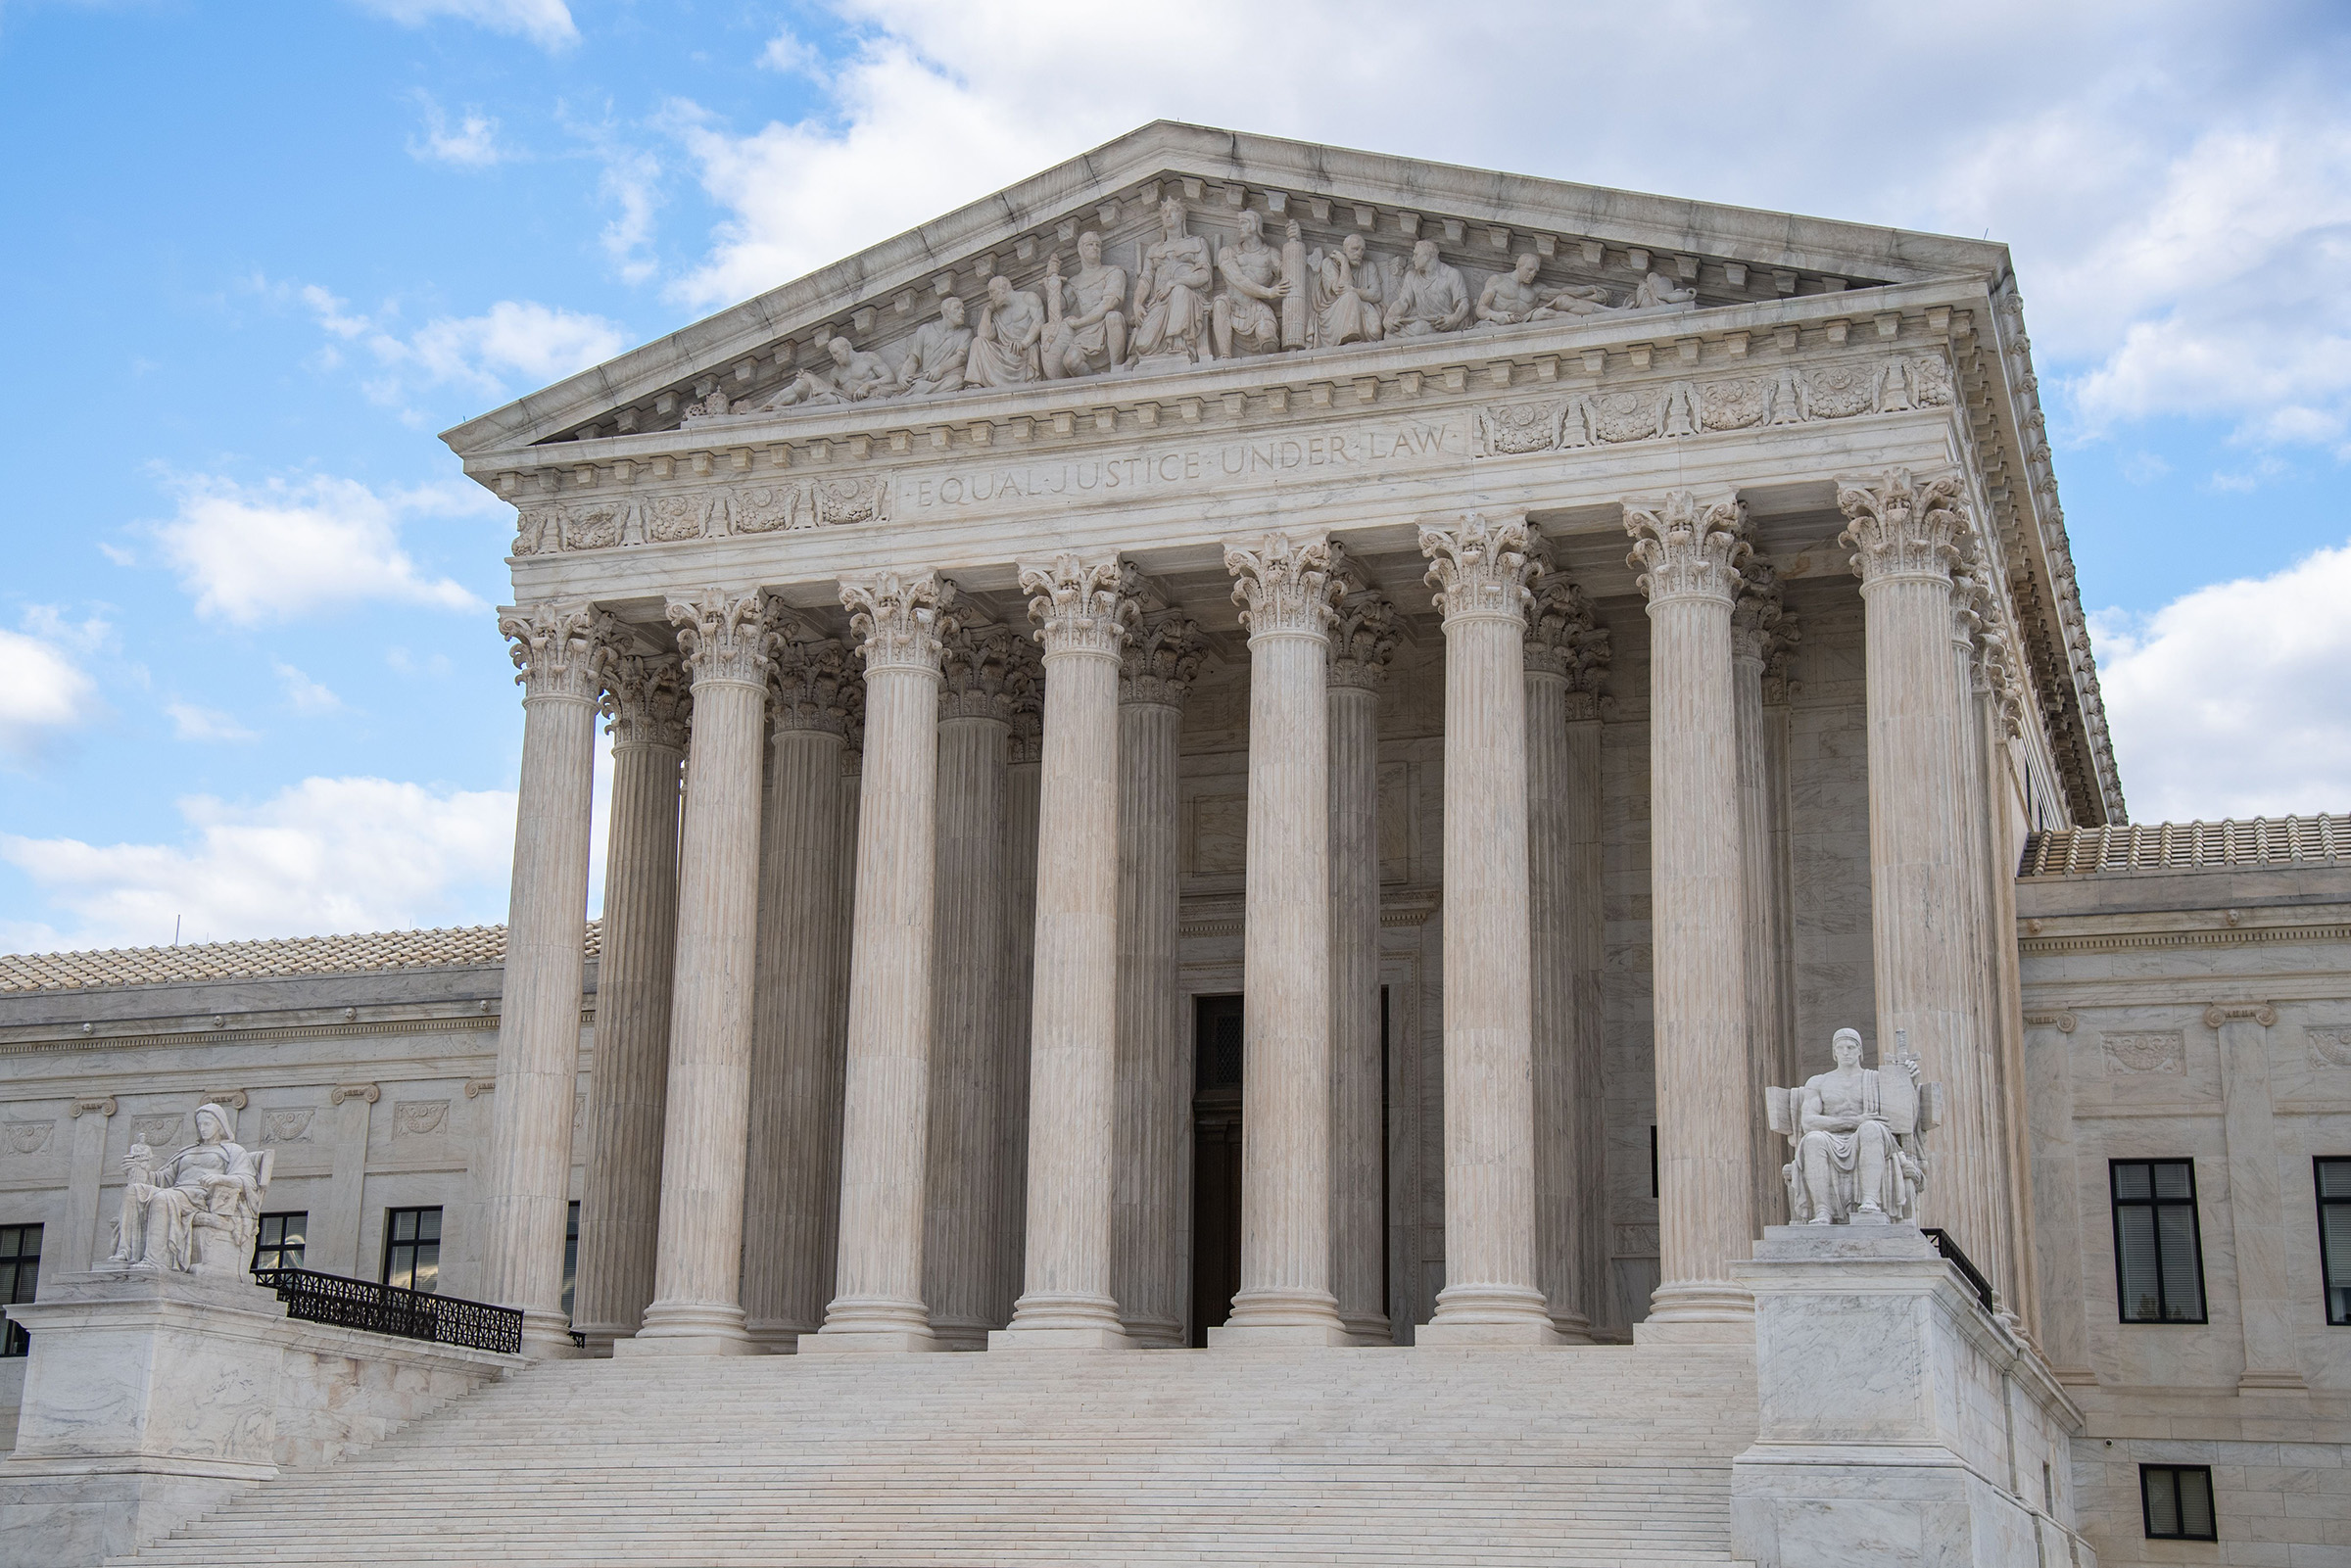 The Supreme Court in Washington, DC on July 11, 2020. (Amy Harris—Shutterstock)